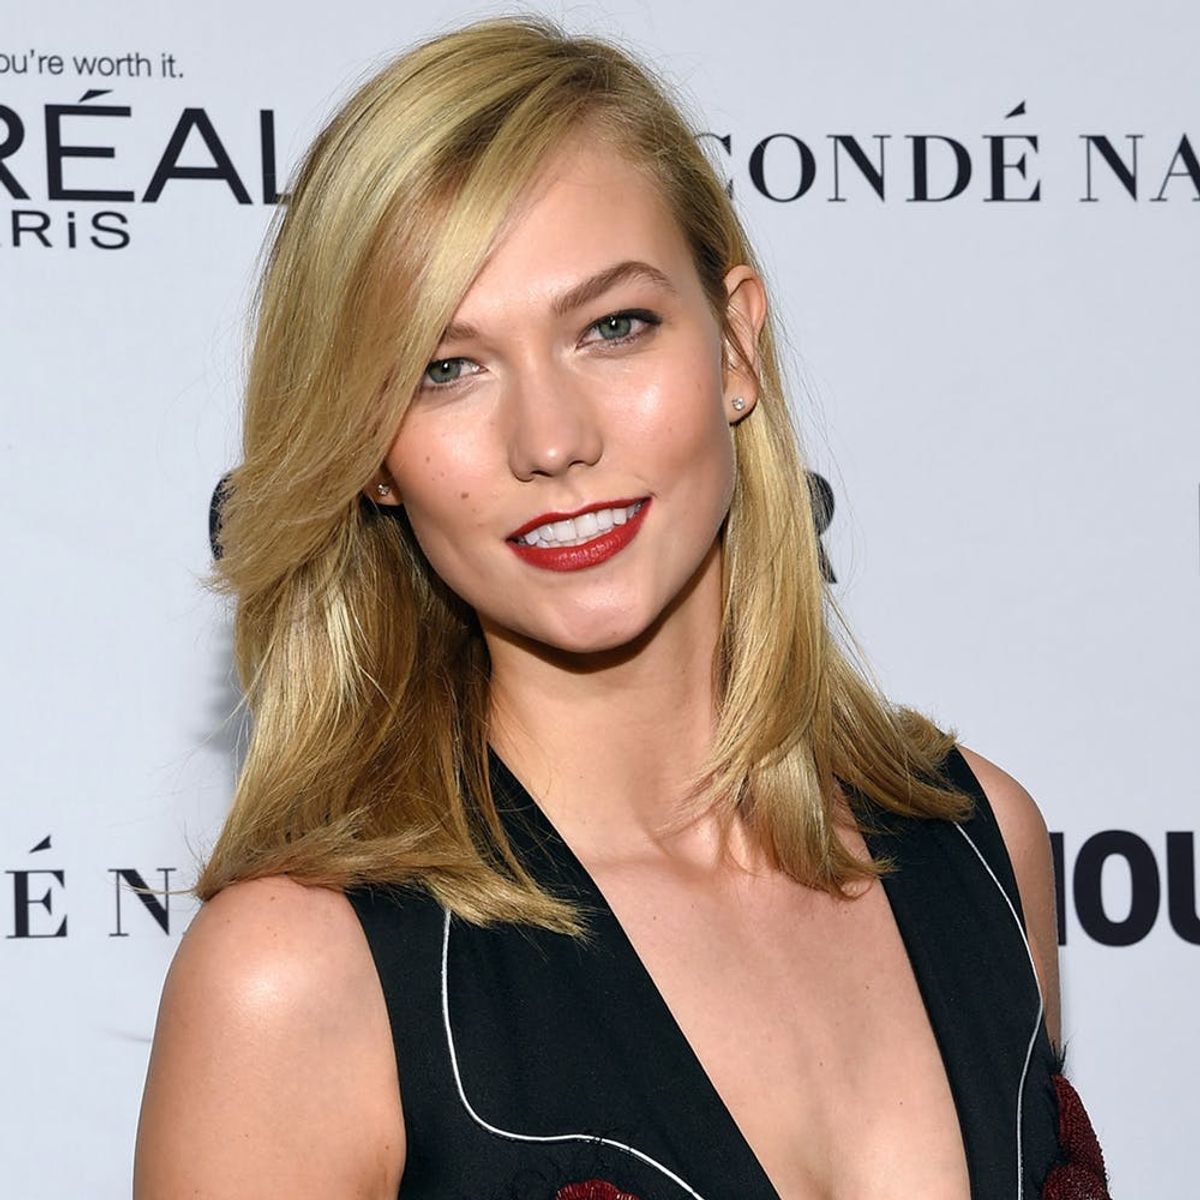 Karlie Kloss Just Launched a Scholarship You Need to Know About - Brit + Co